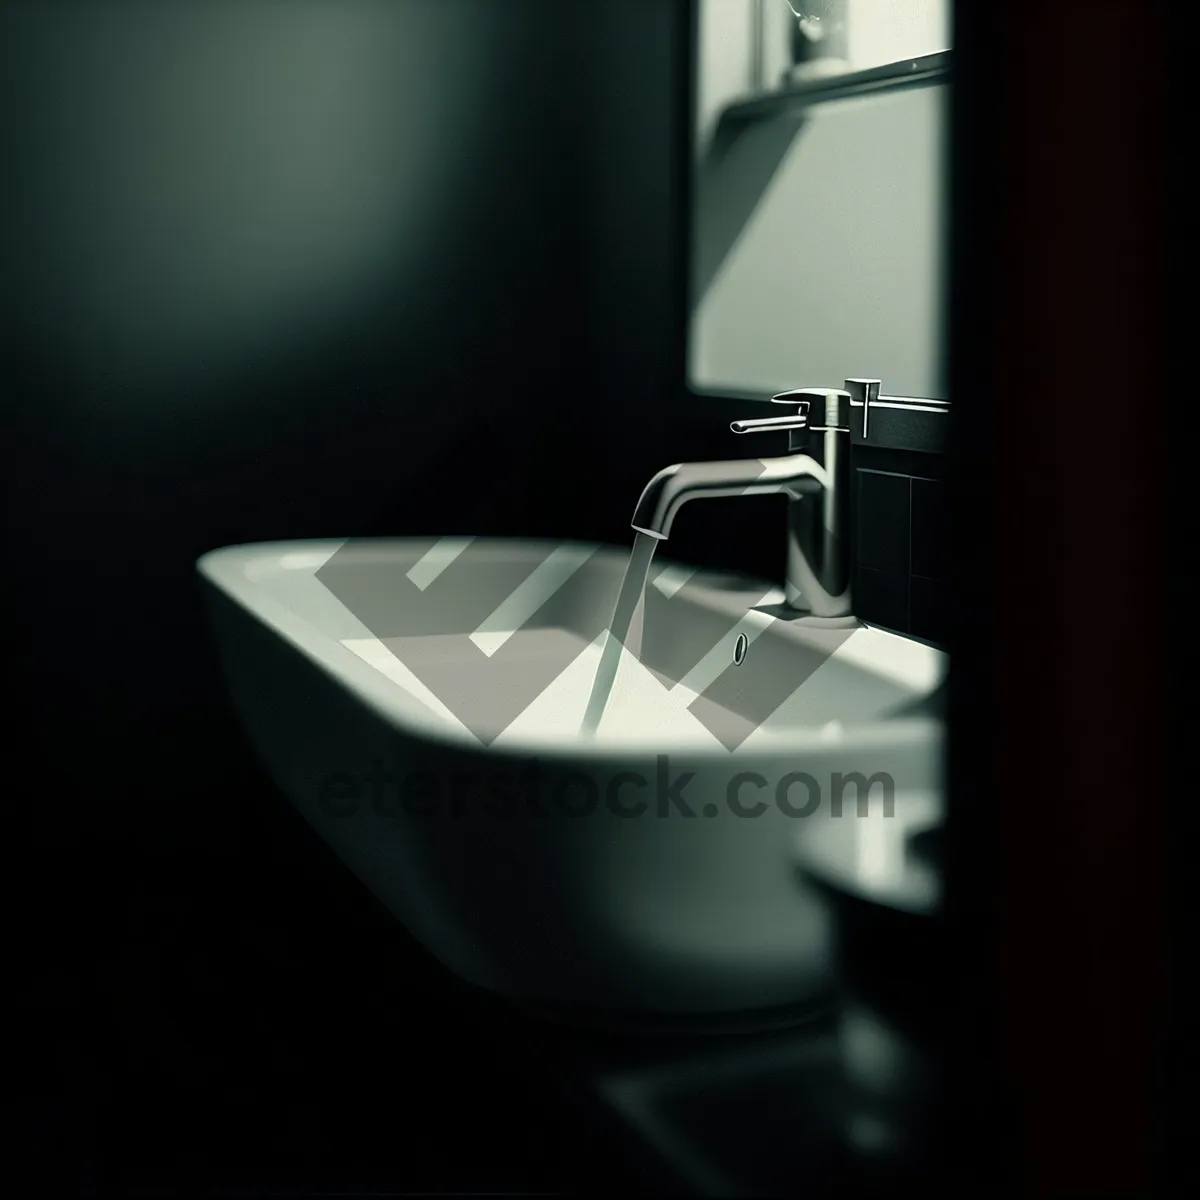 Picture of Modern Clean Bathroom Sink Fixture with Water Faucet